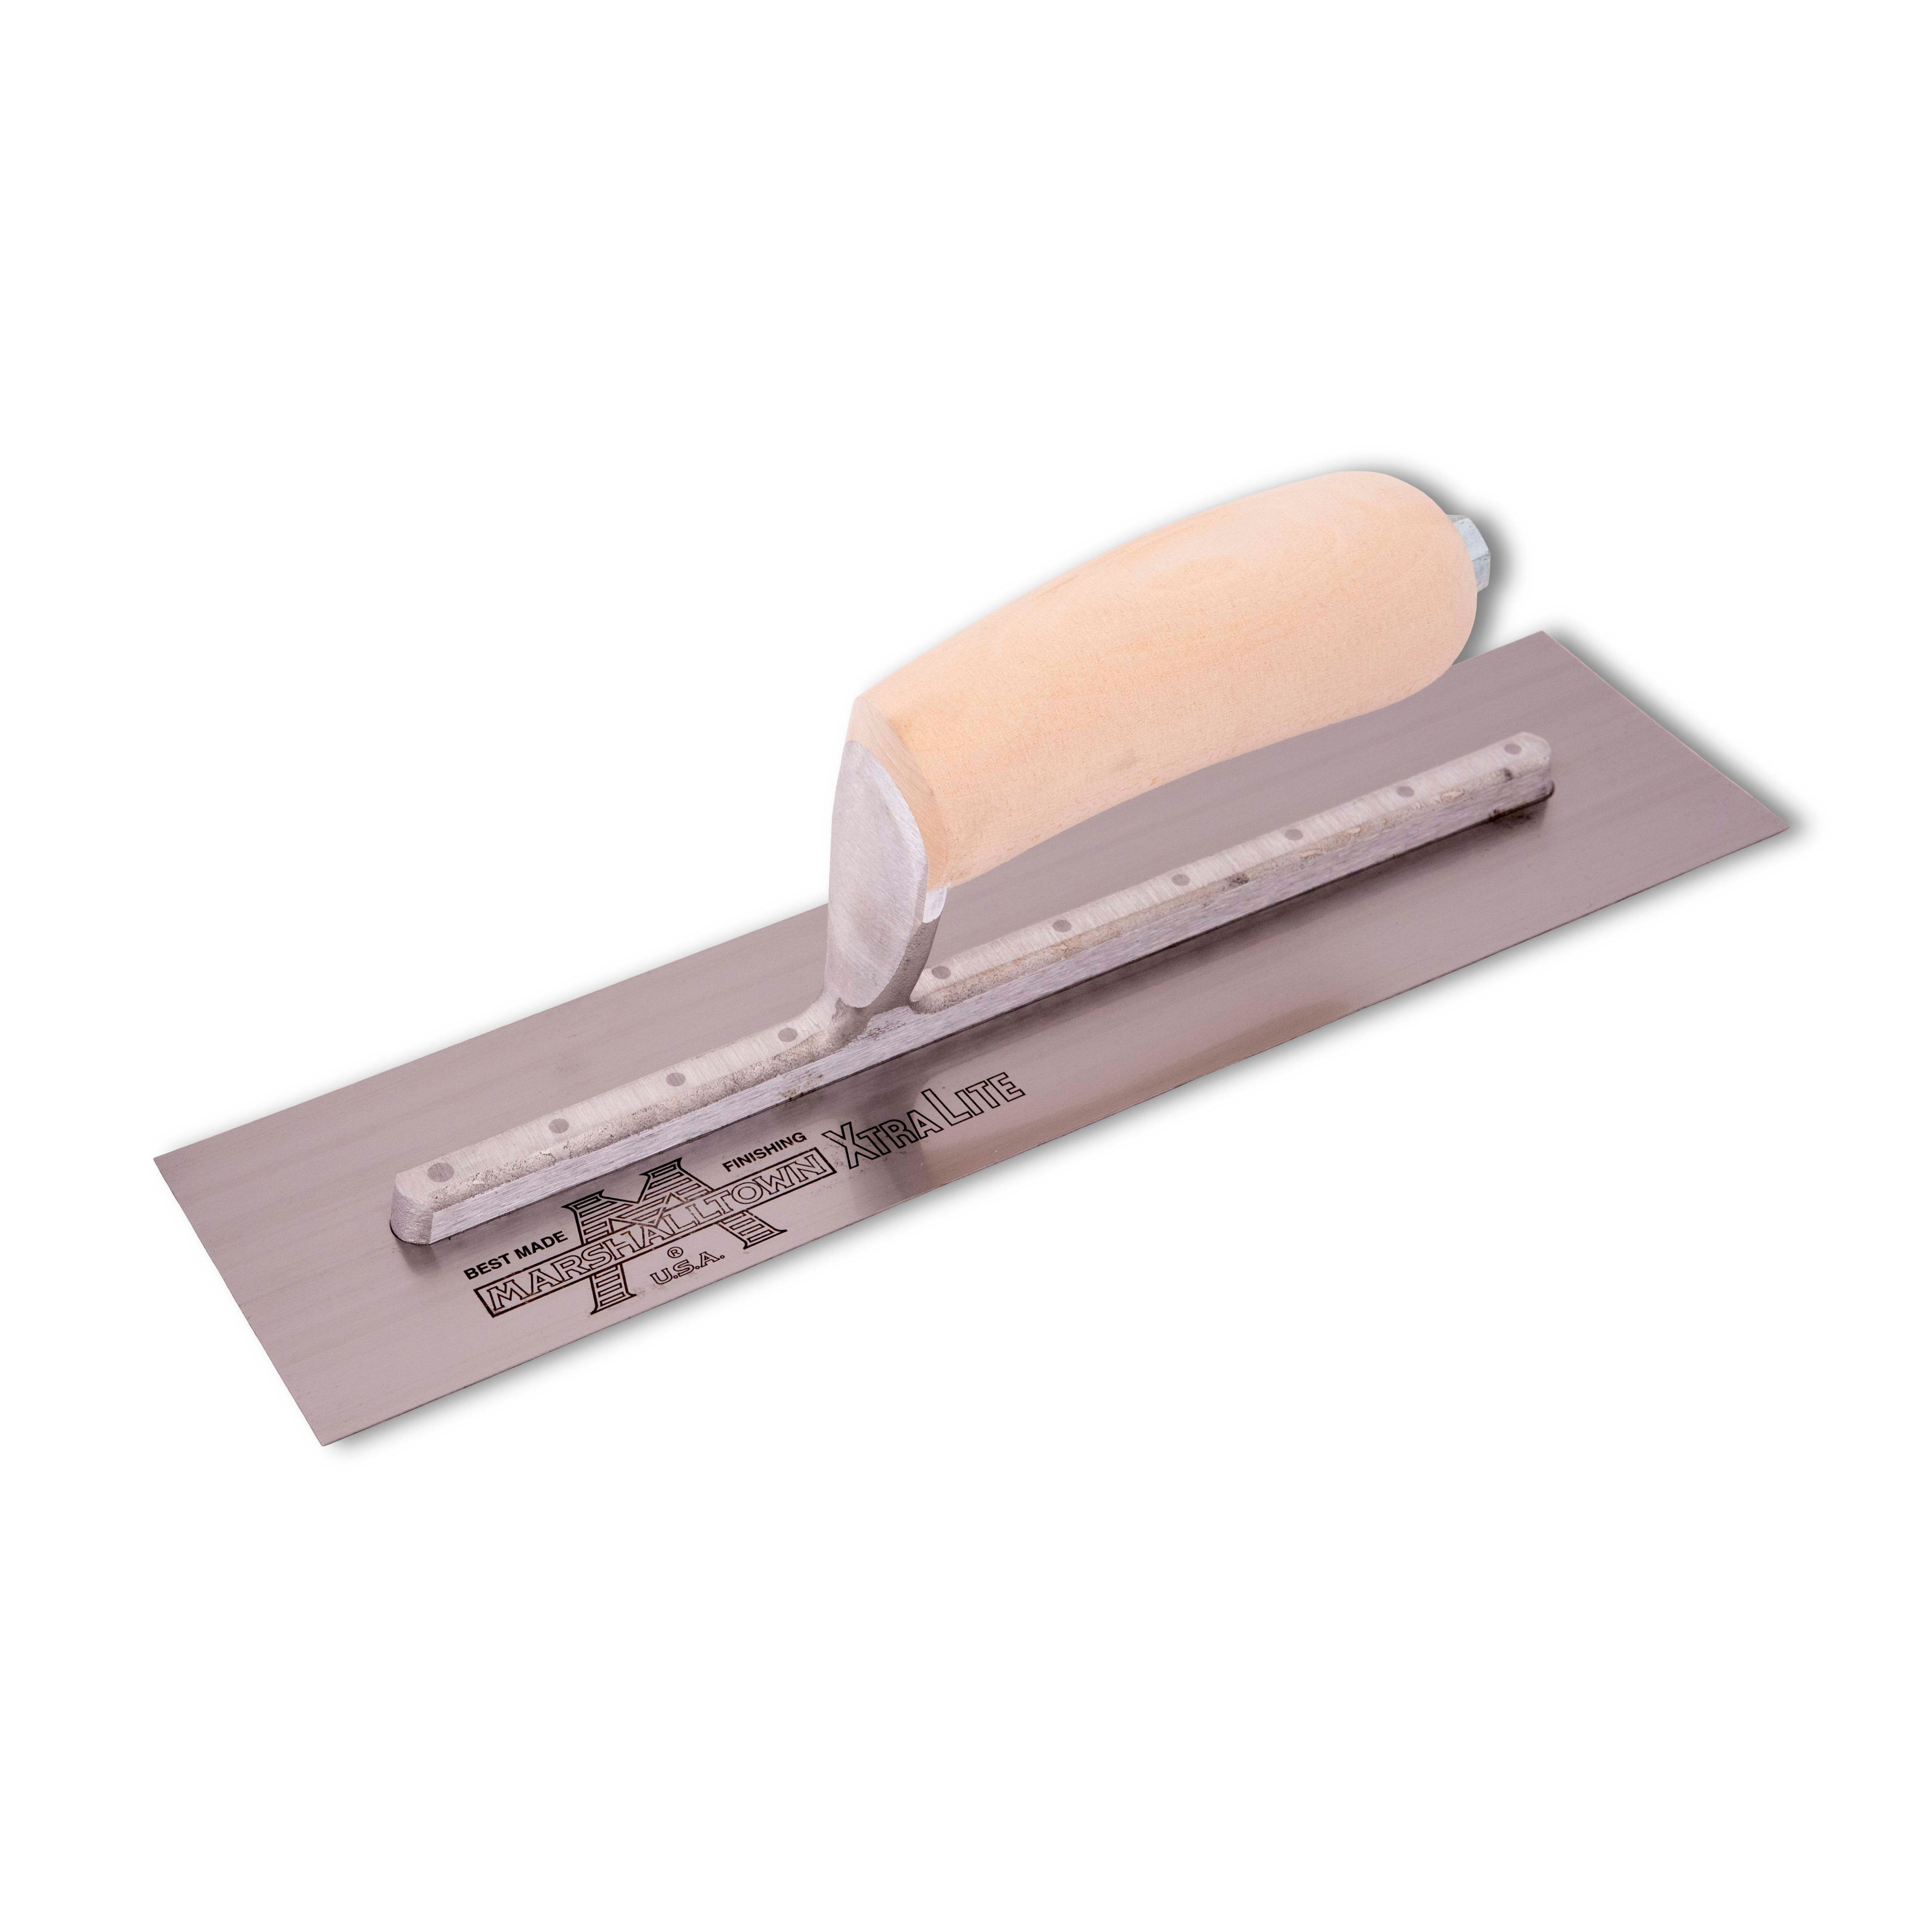 Marshalltown MXS56 12in. x 3in. Finishing Trowel Curved Wood Handle MAT-MXS56